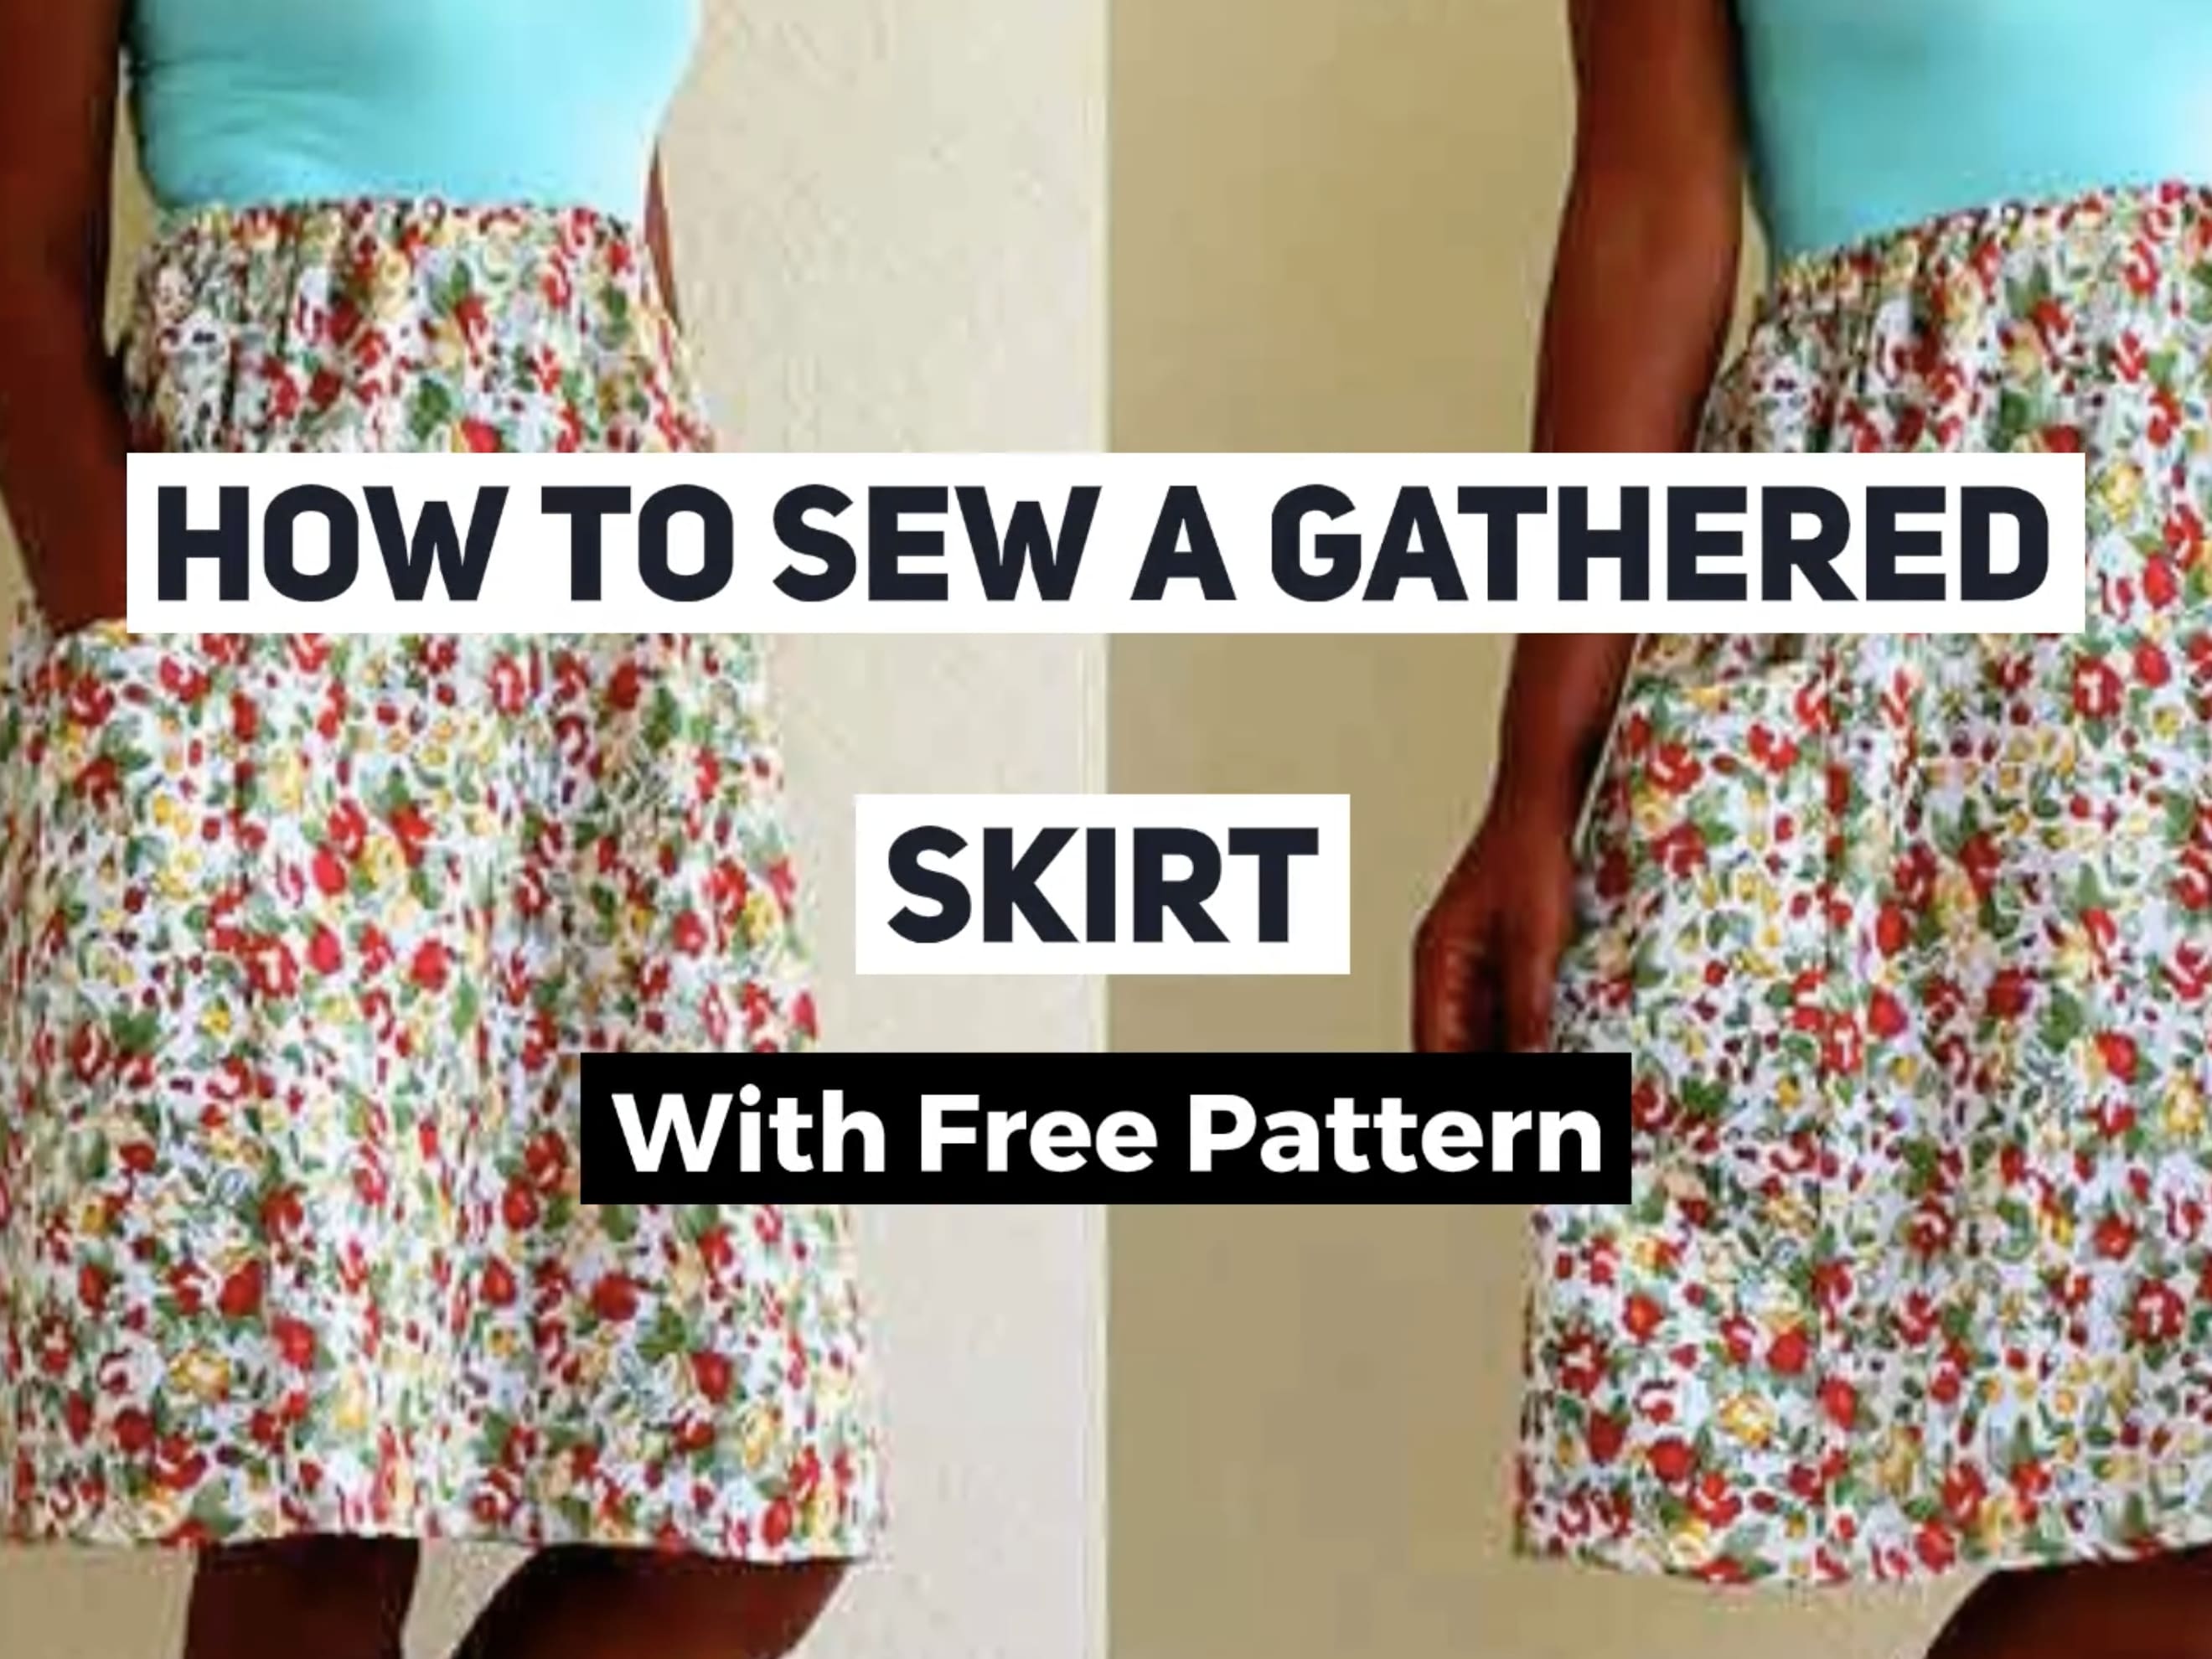 How To Make A Gathered Skirt With Free Pattern